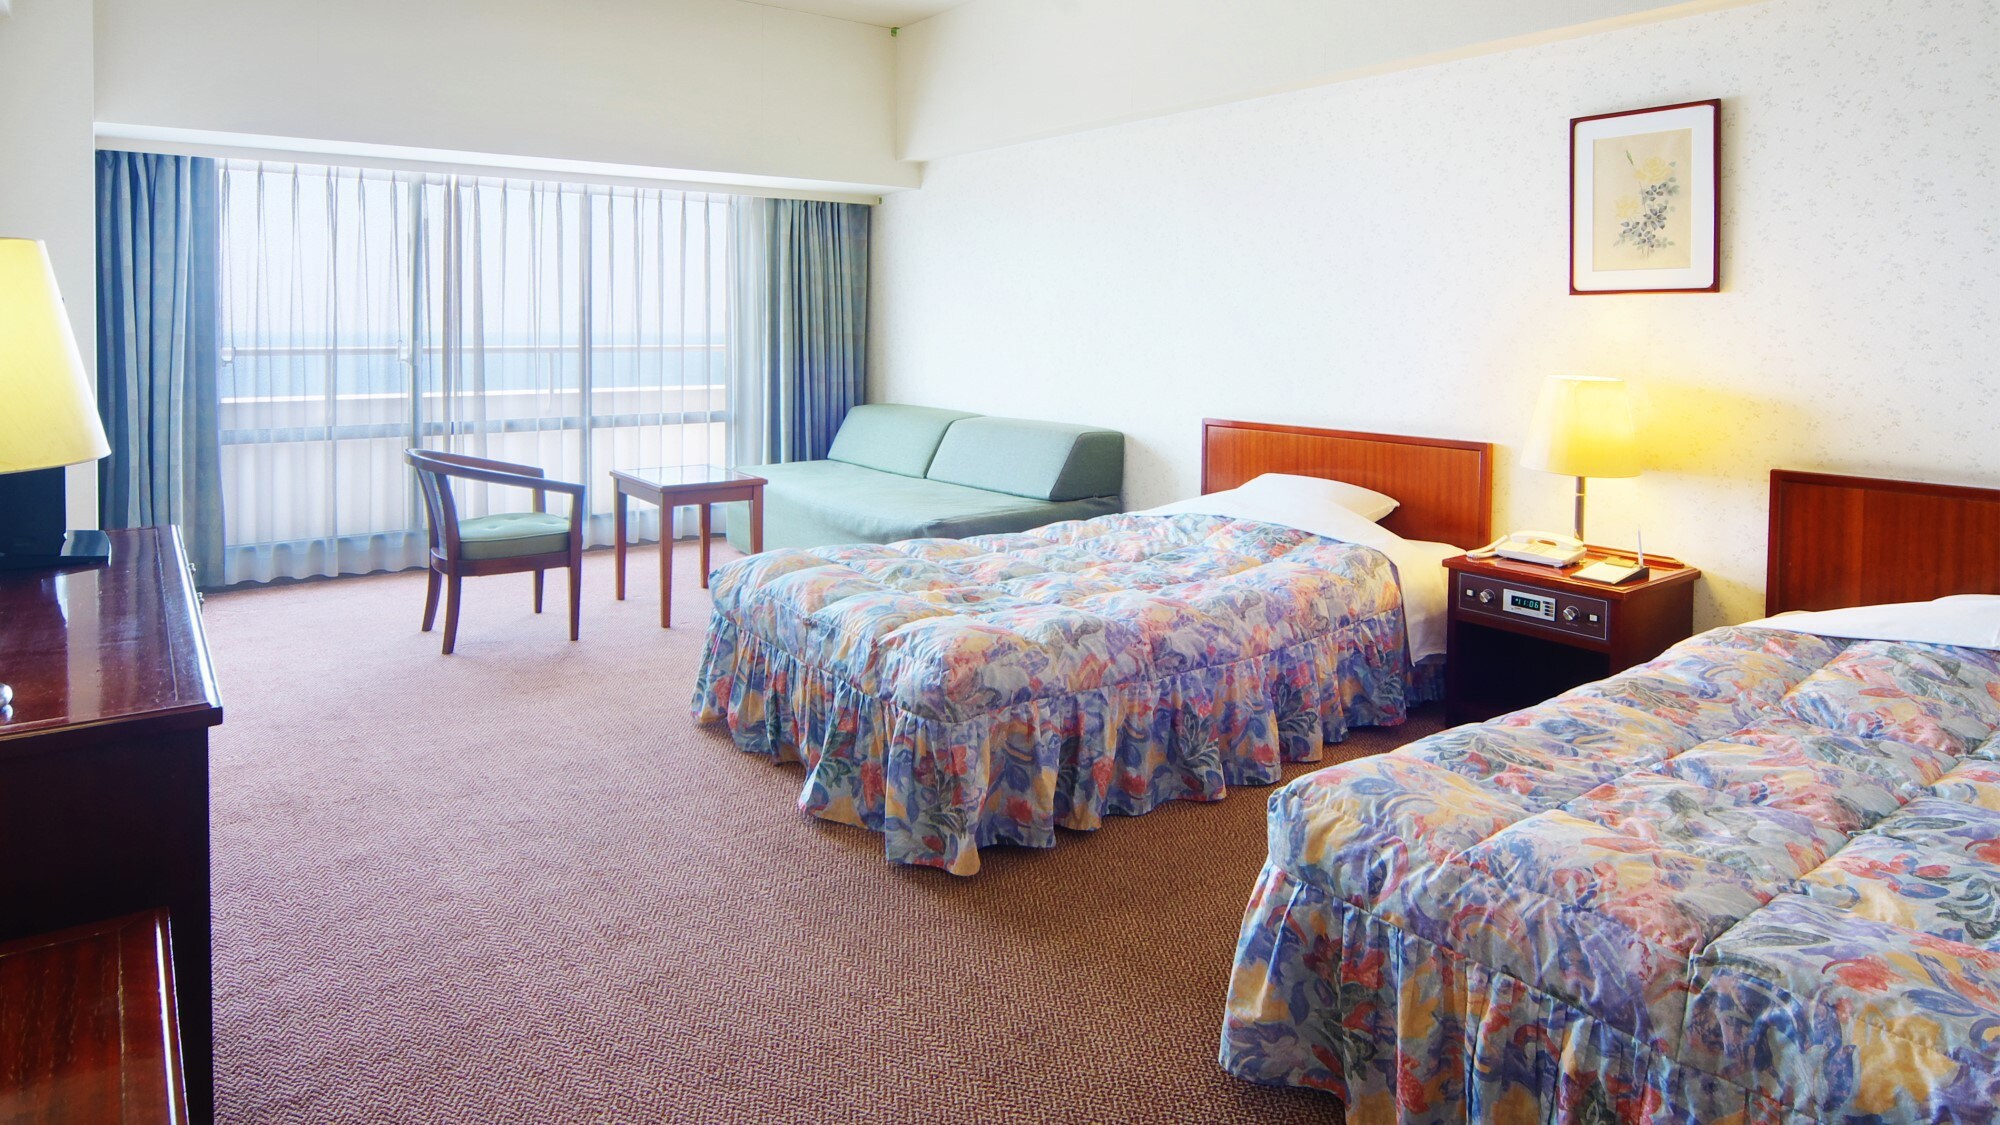 The Western-style room has 2 beds, and 3 or more people can use a sofa bed.